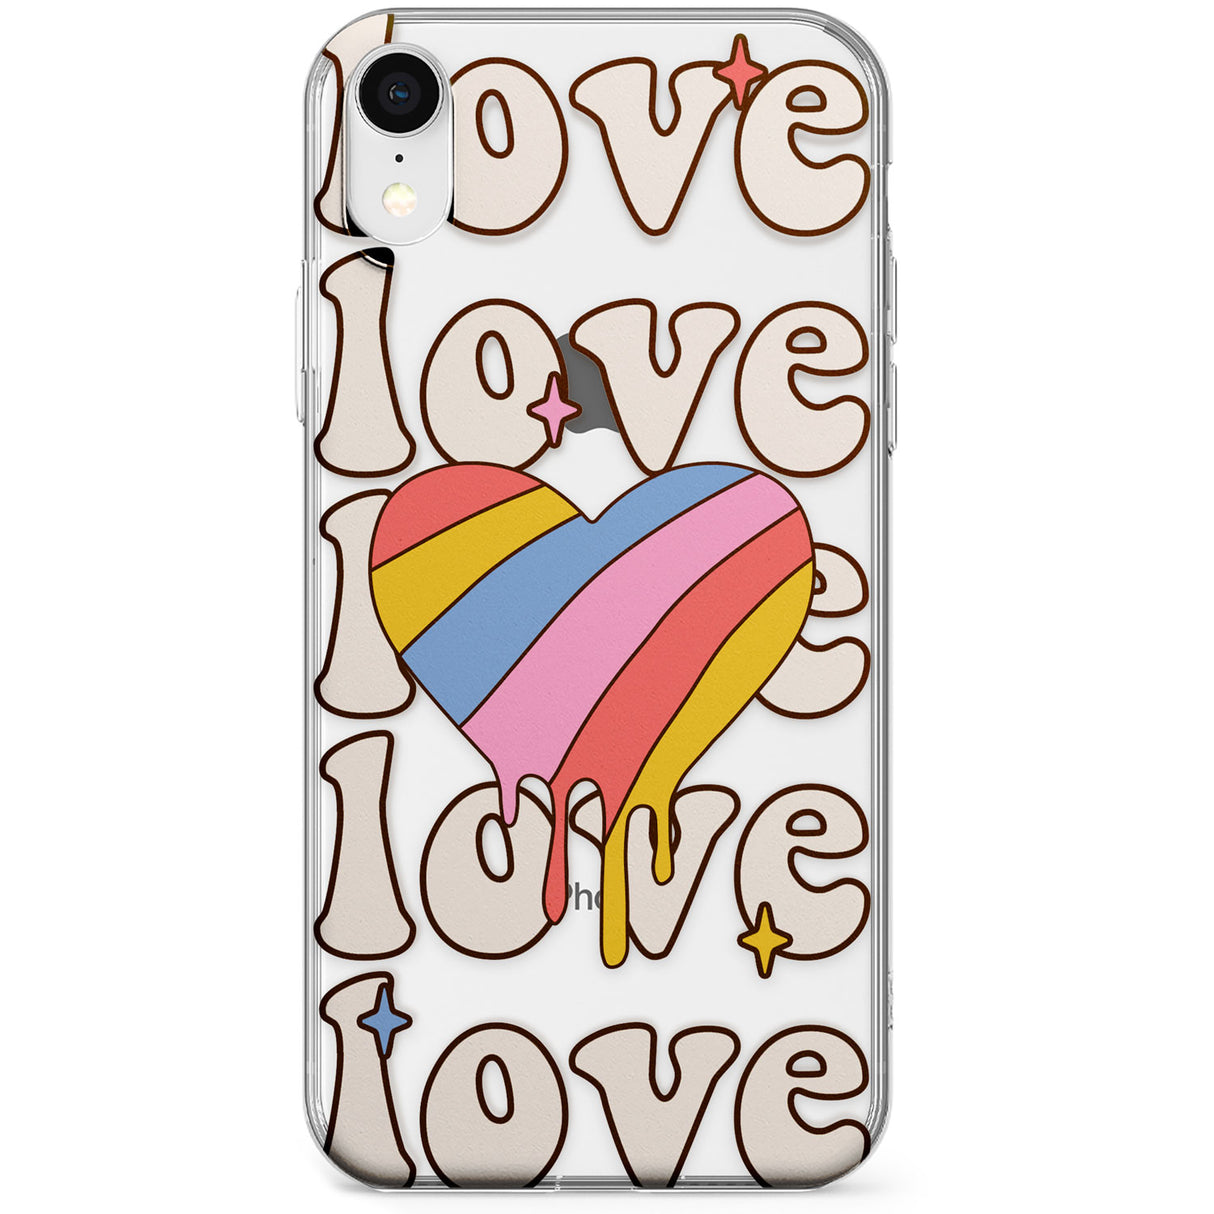 Groovy Love Phone Case for iPhone X, XS Max, XR